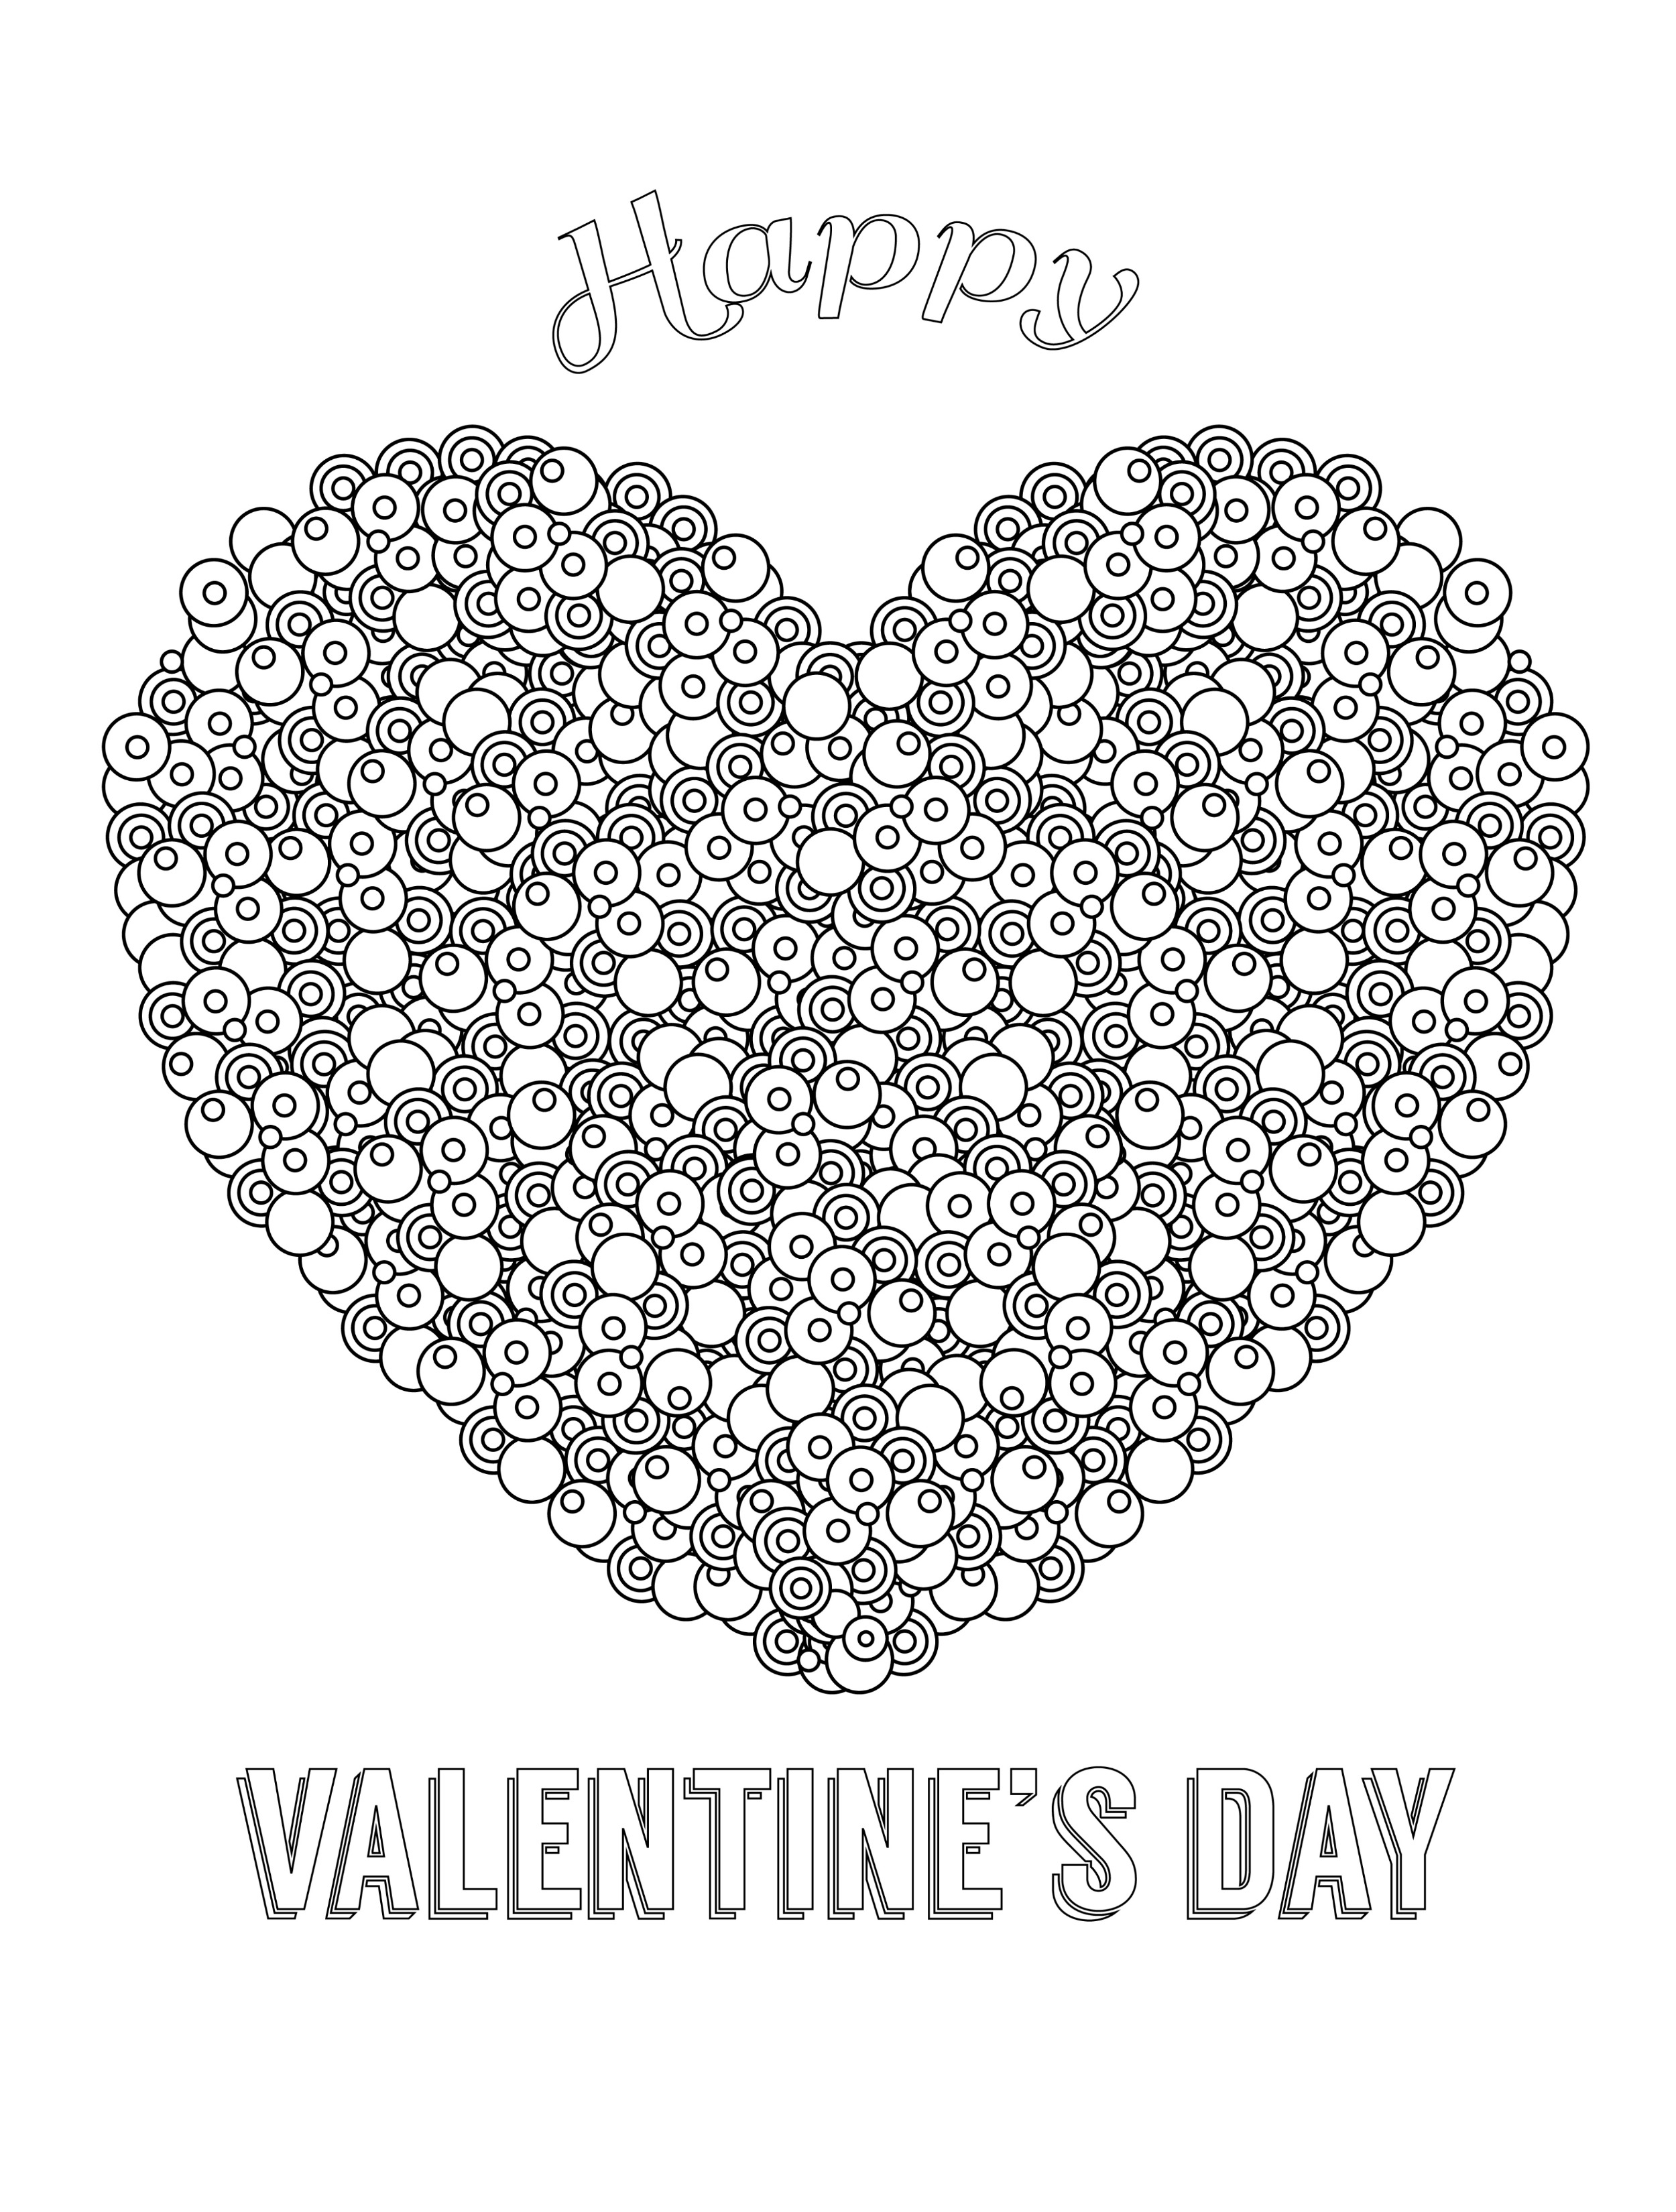 Valentines Day Coloring Pages For Adults Best Coloring Pages For Kids